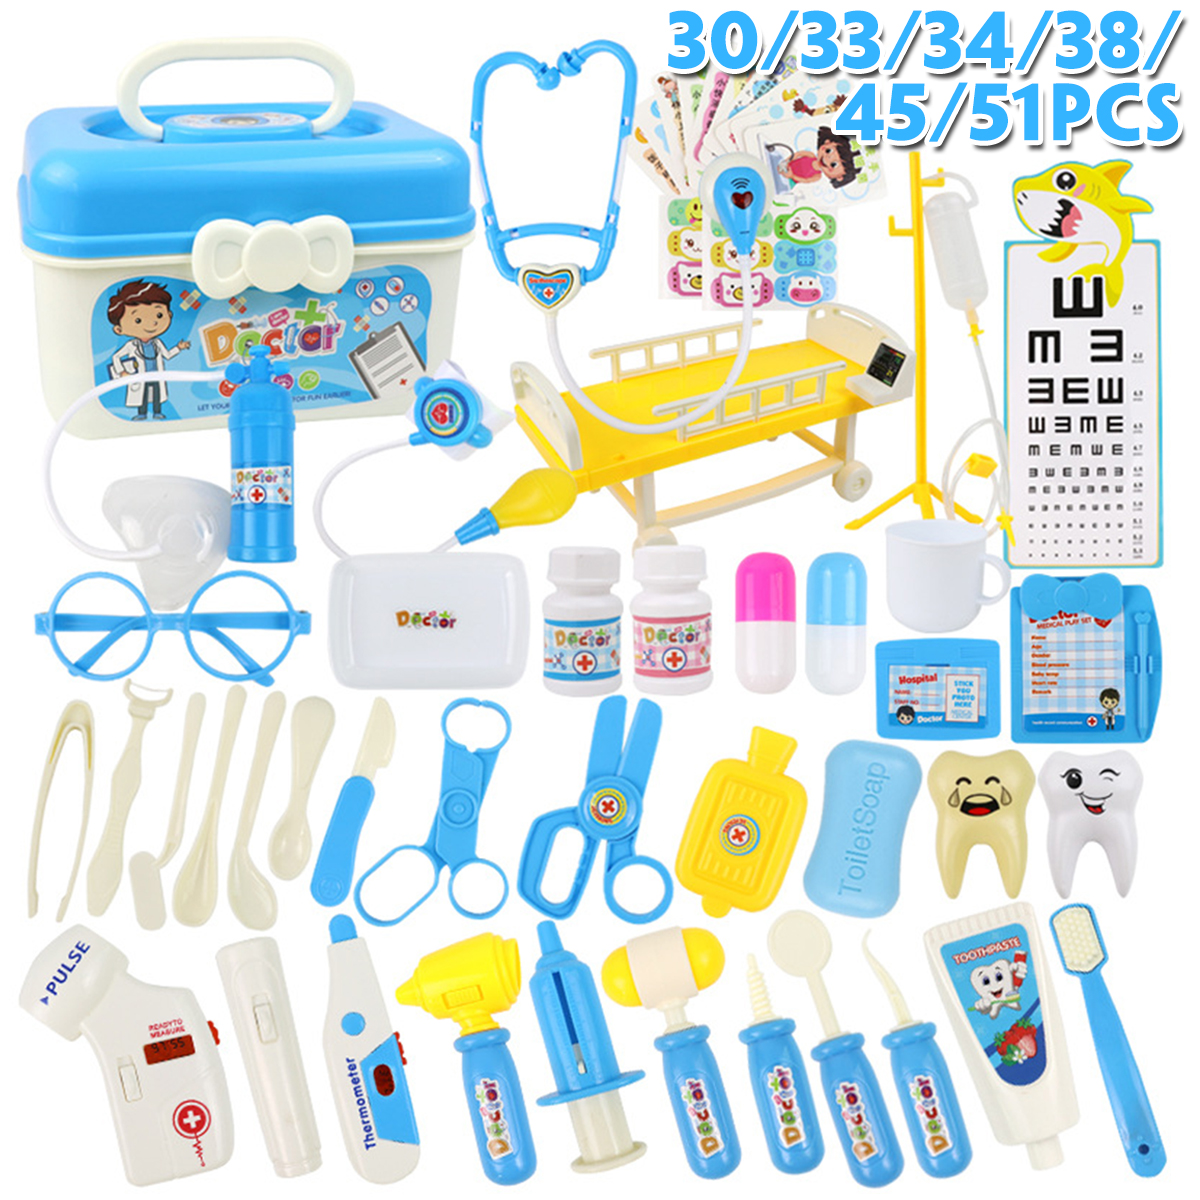 303334384551Pcs-Simulation-Medical-Role-Play-Pretend-Doctor-Game-Equipment-Set-Early-Educational-Toy-1828118-1